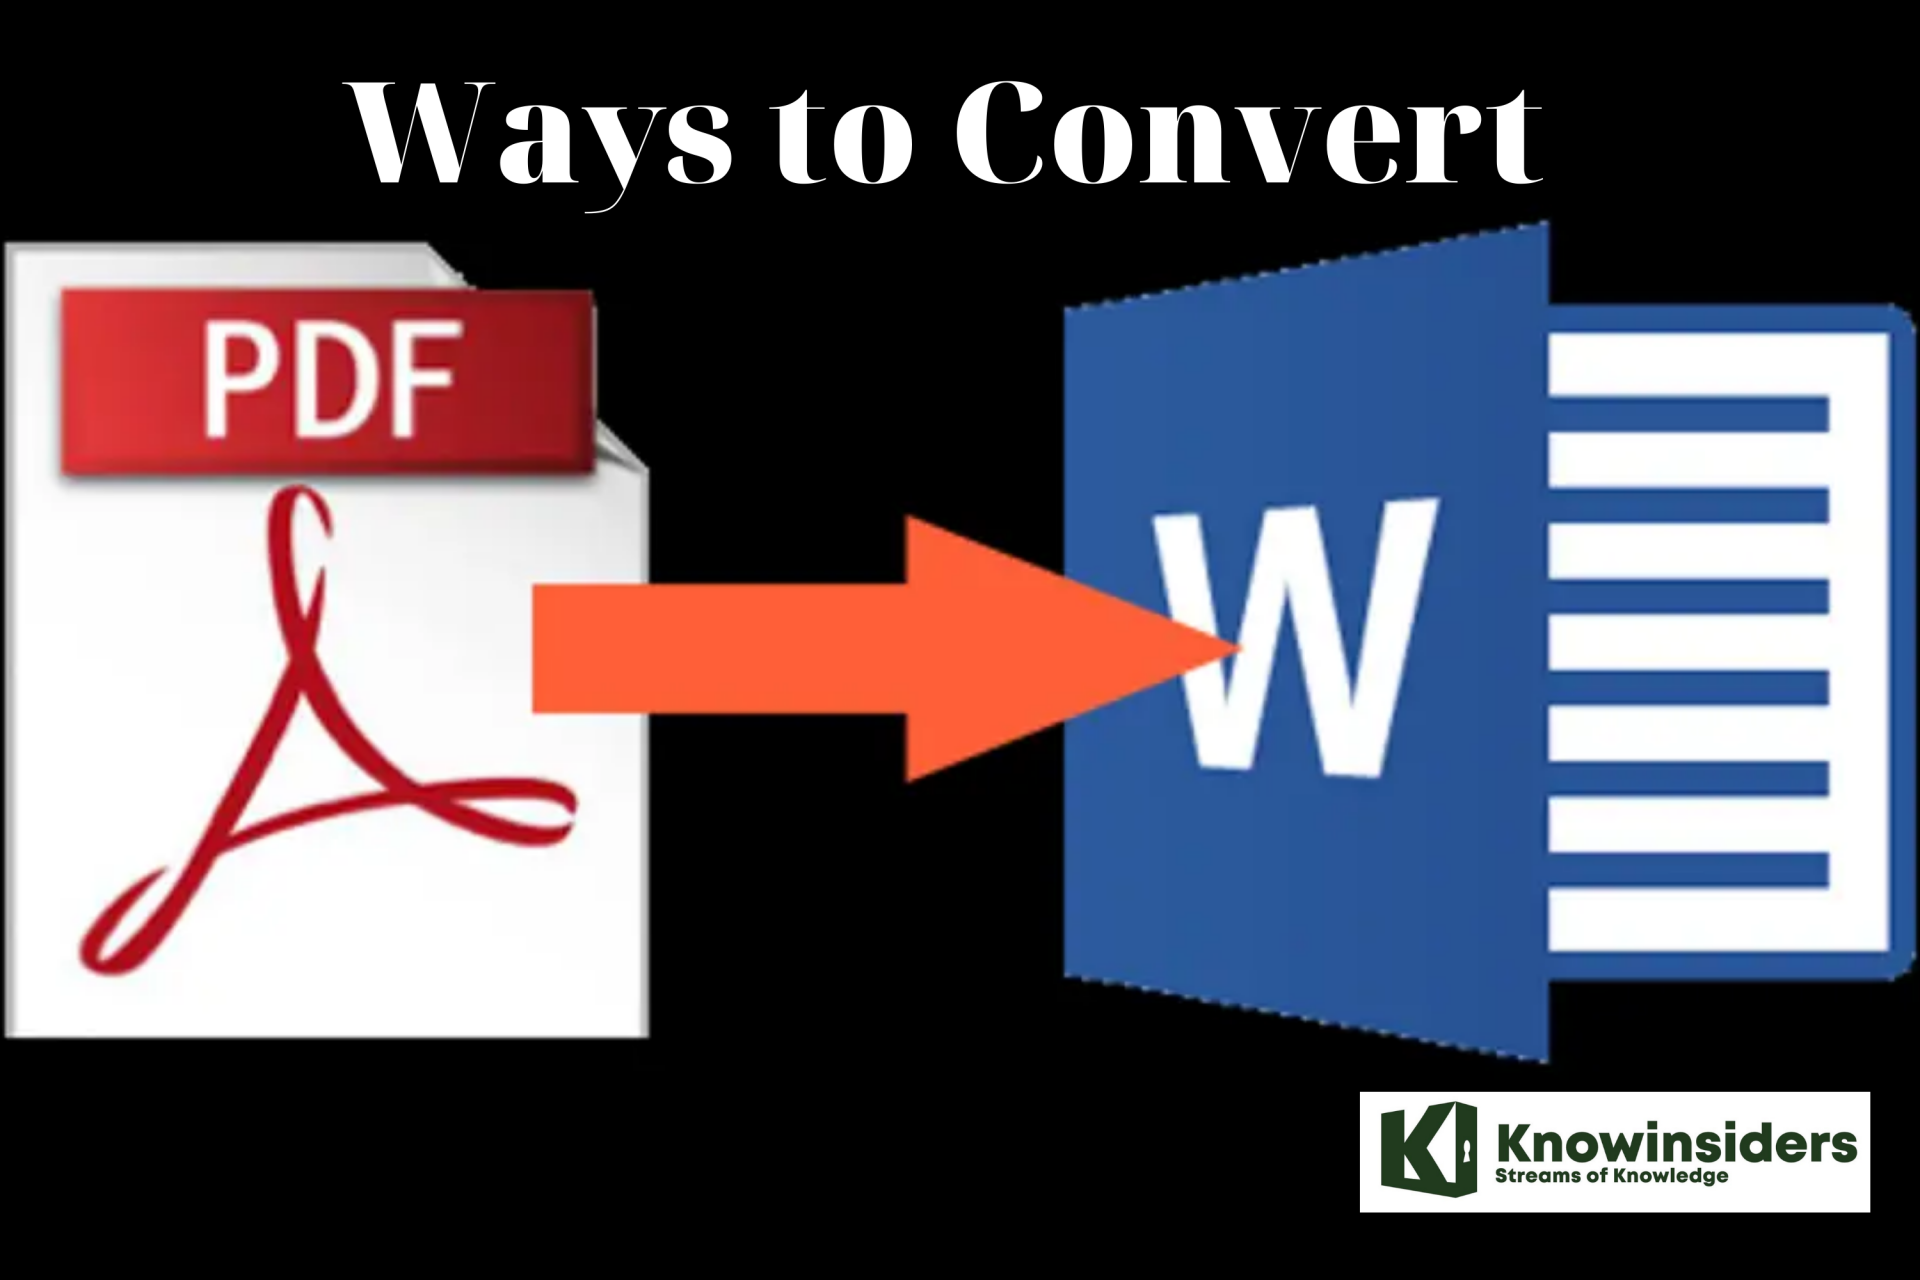 How To Convert a PDF into a Word Docum ent